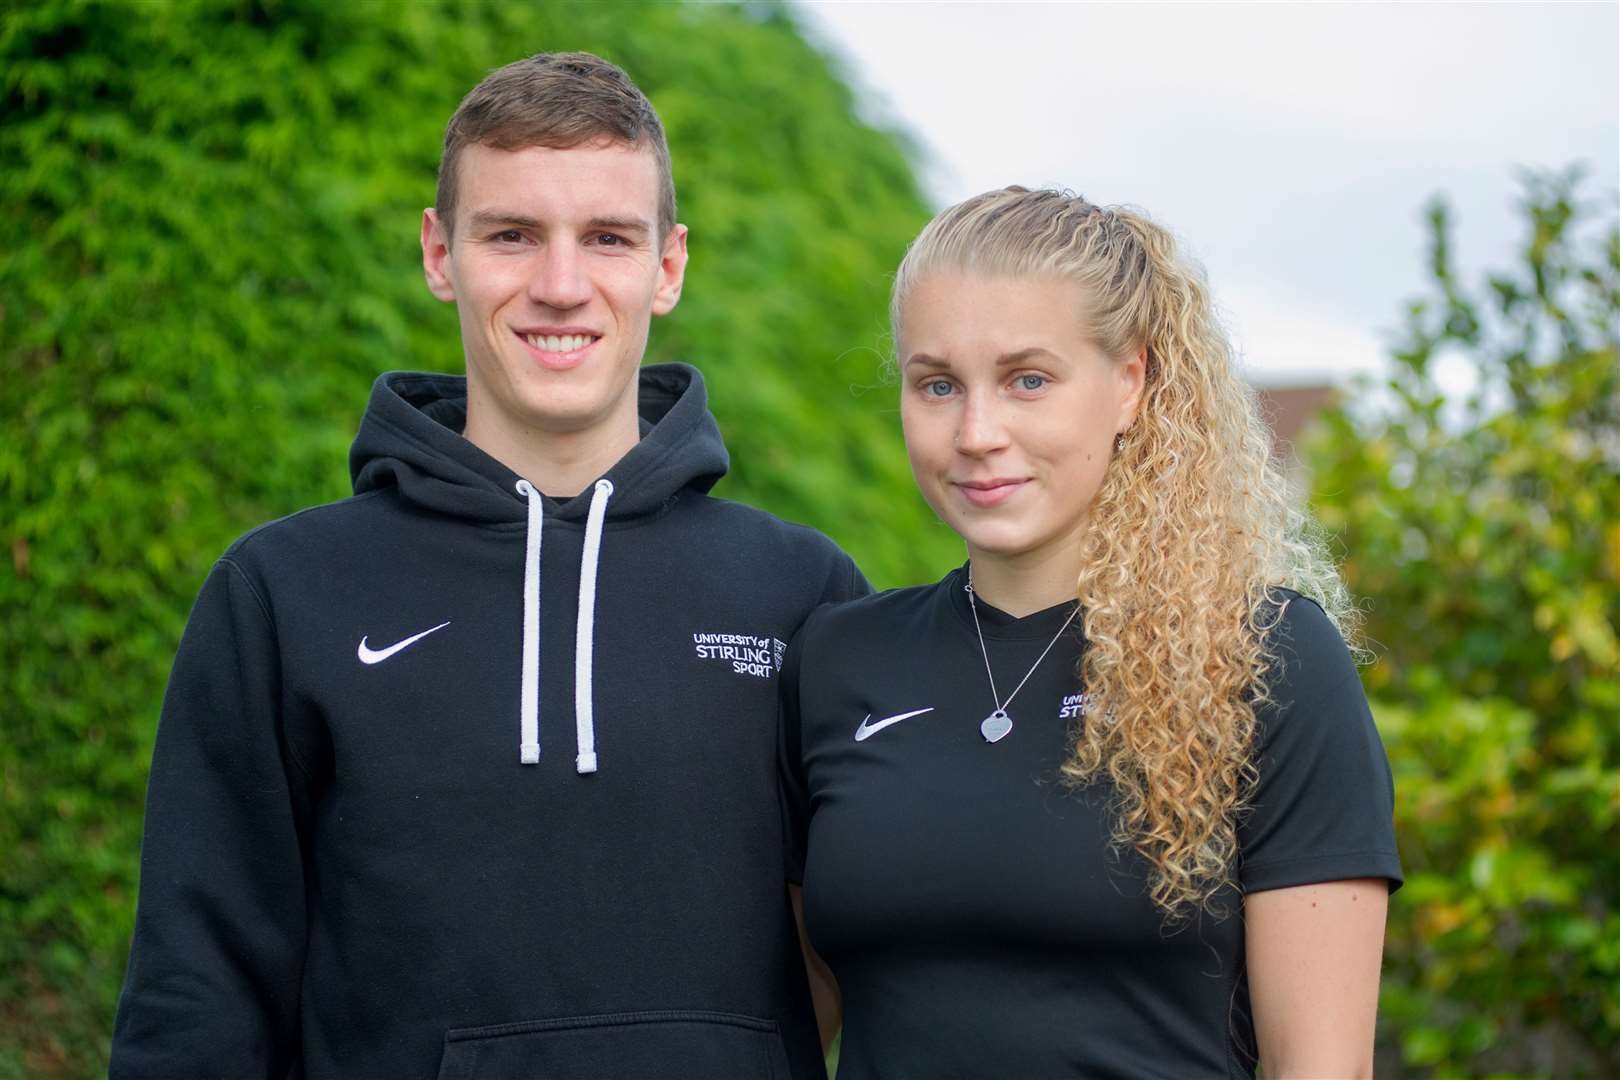 Elgin couple Sophia Green and Cameron Main will represent Scotland at the Commonwealth Games team in Birmingham at the end of July. Picture: Daniel Forsyth